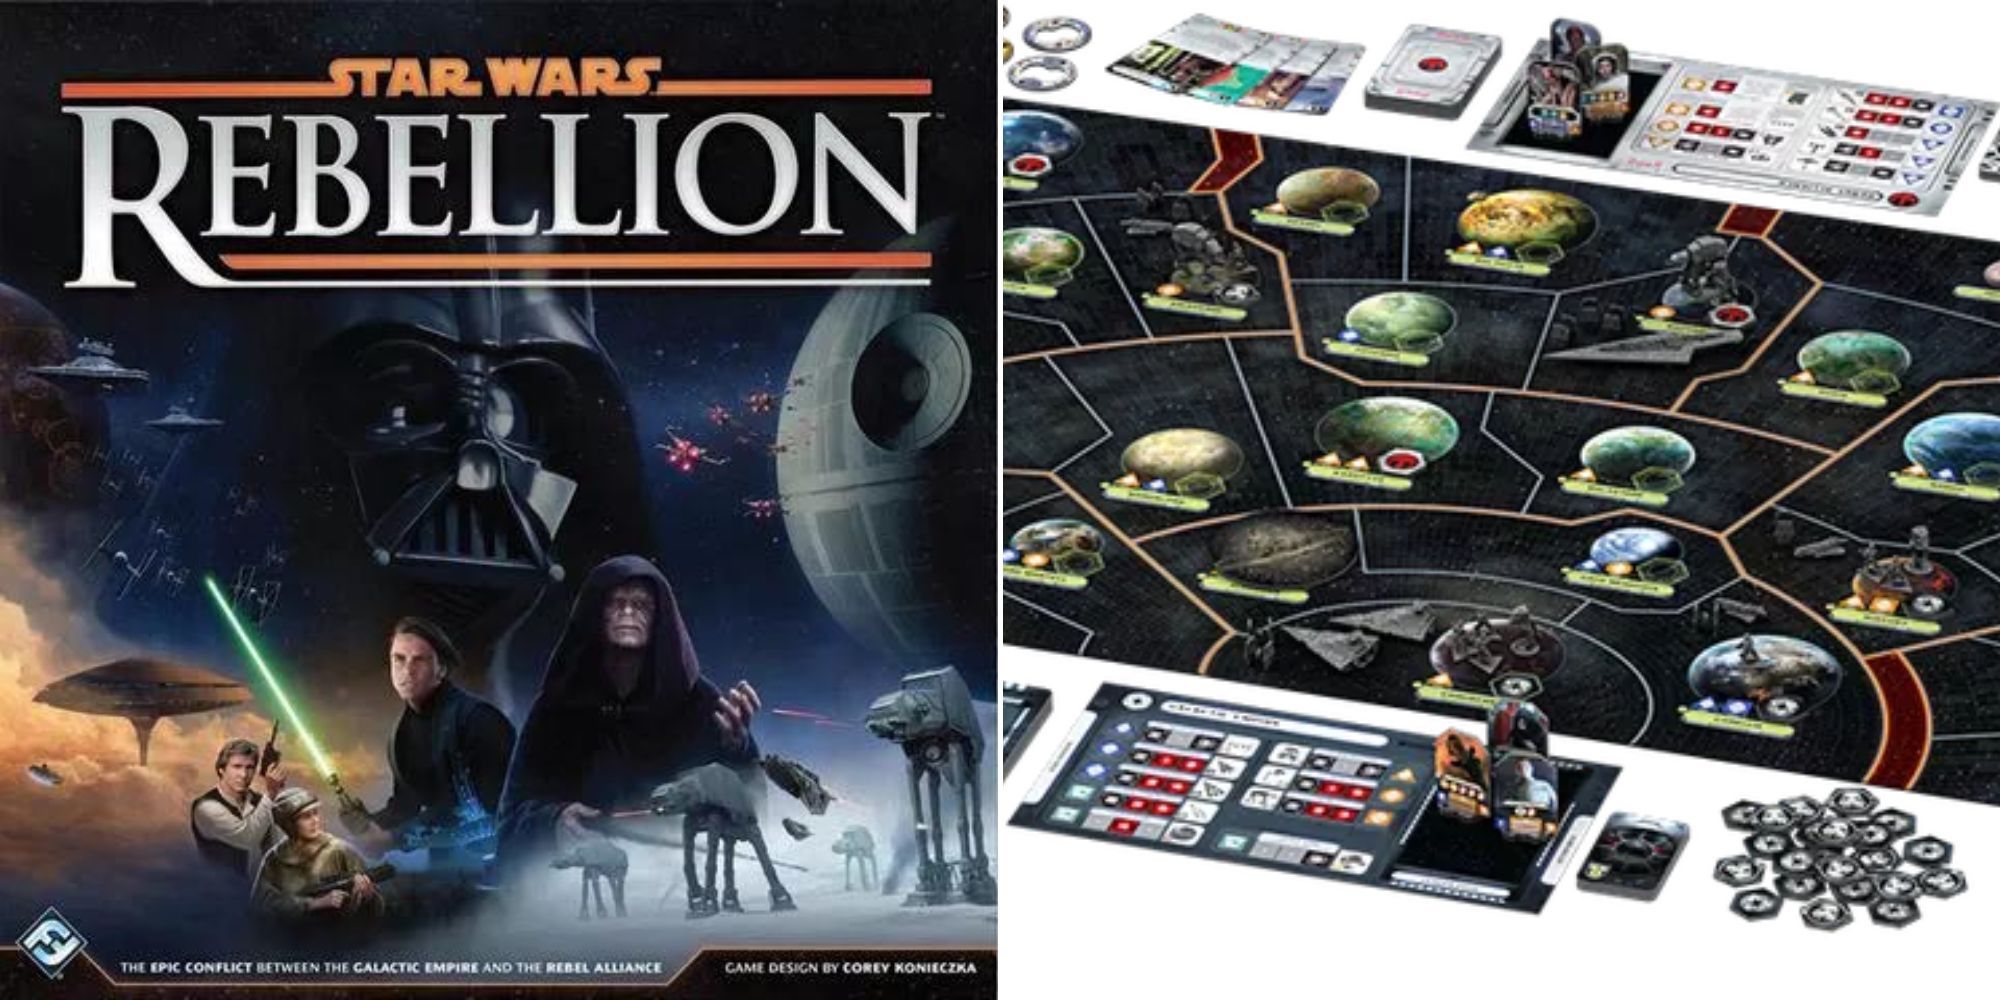 Star Wars Rebellion Board Game Box - The board and components